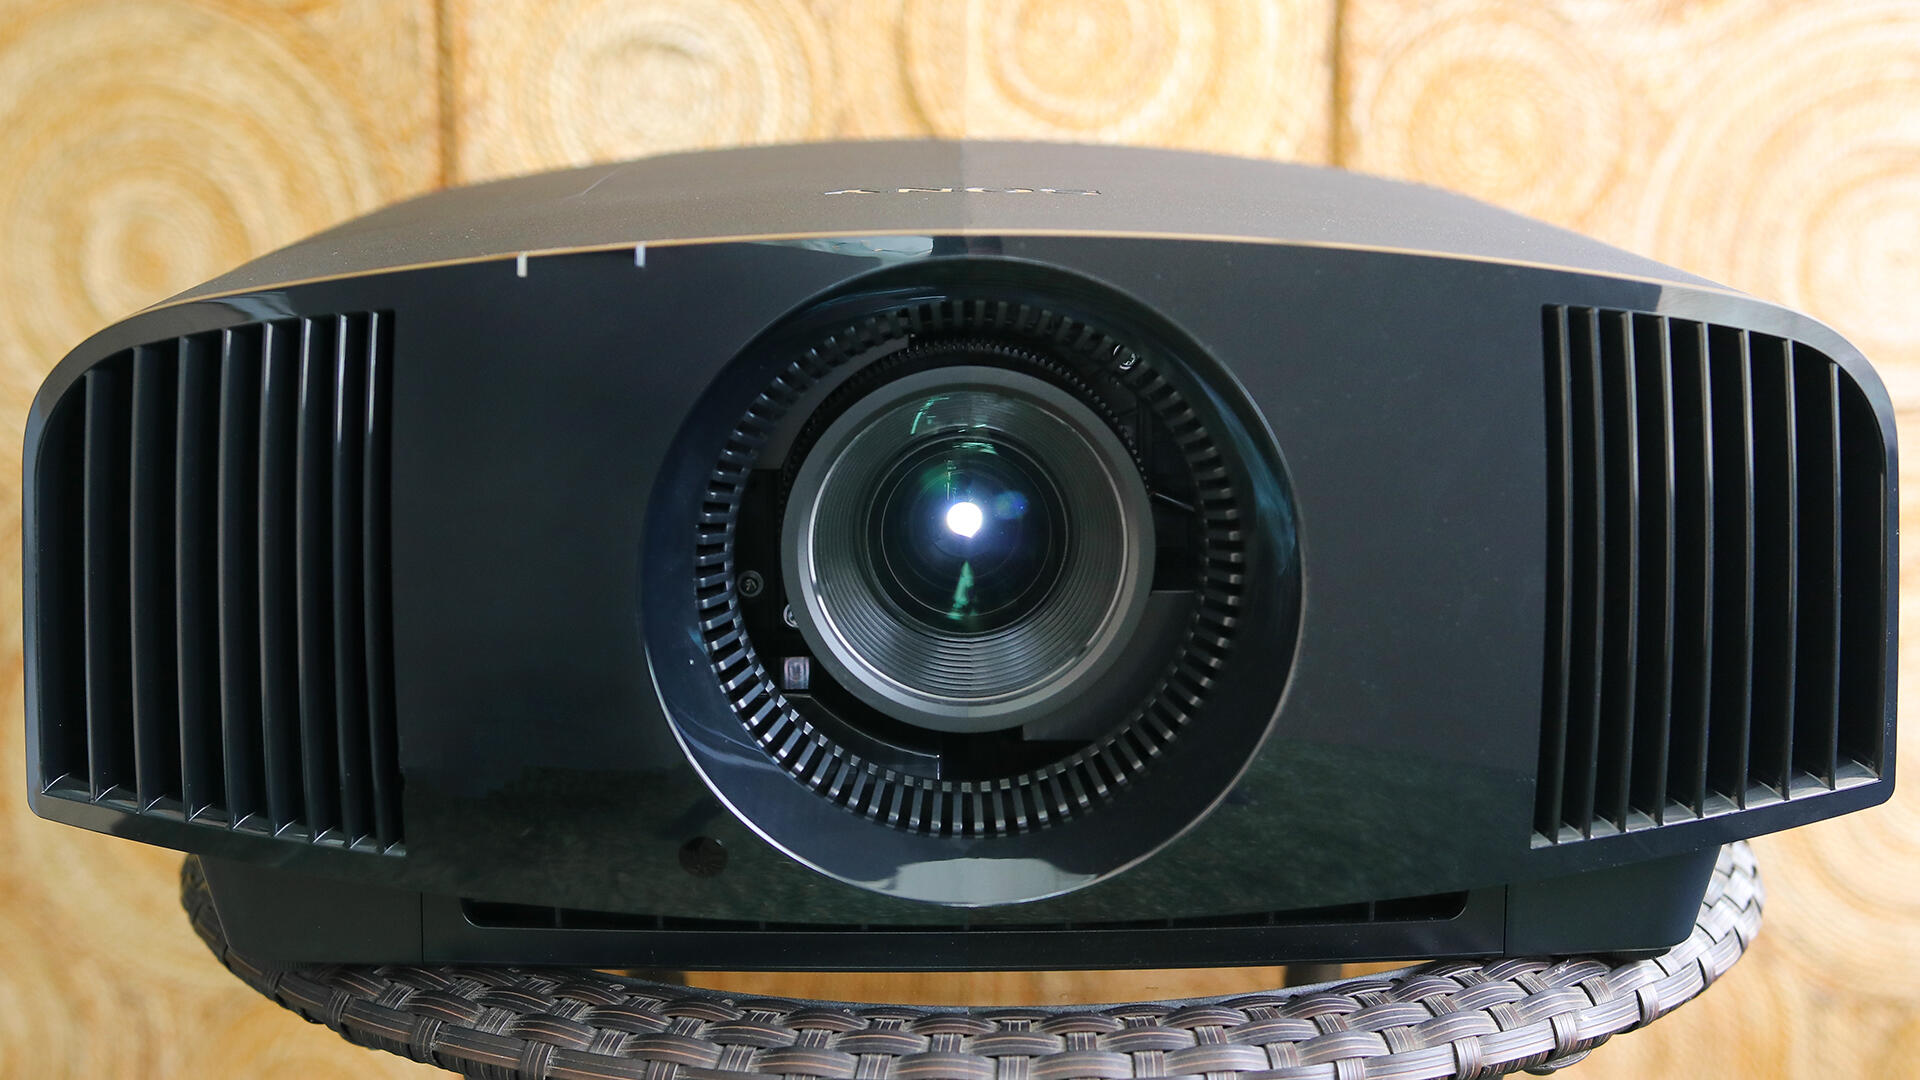 Sony VPL-VW325ES 4K projector review: Epic home theater     - CNET